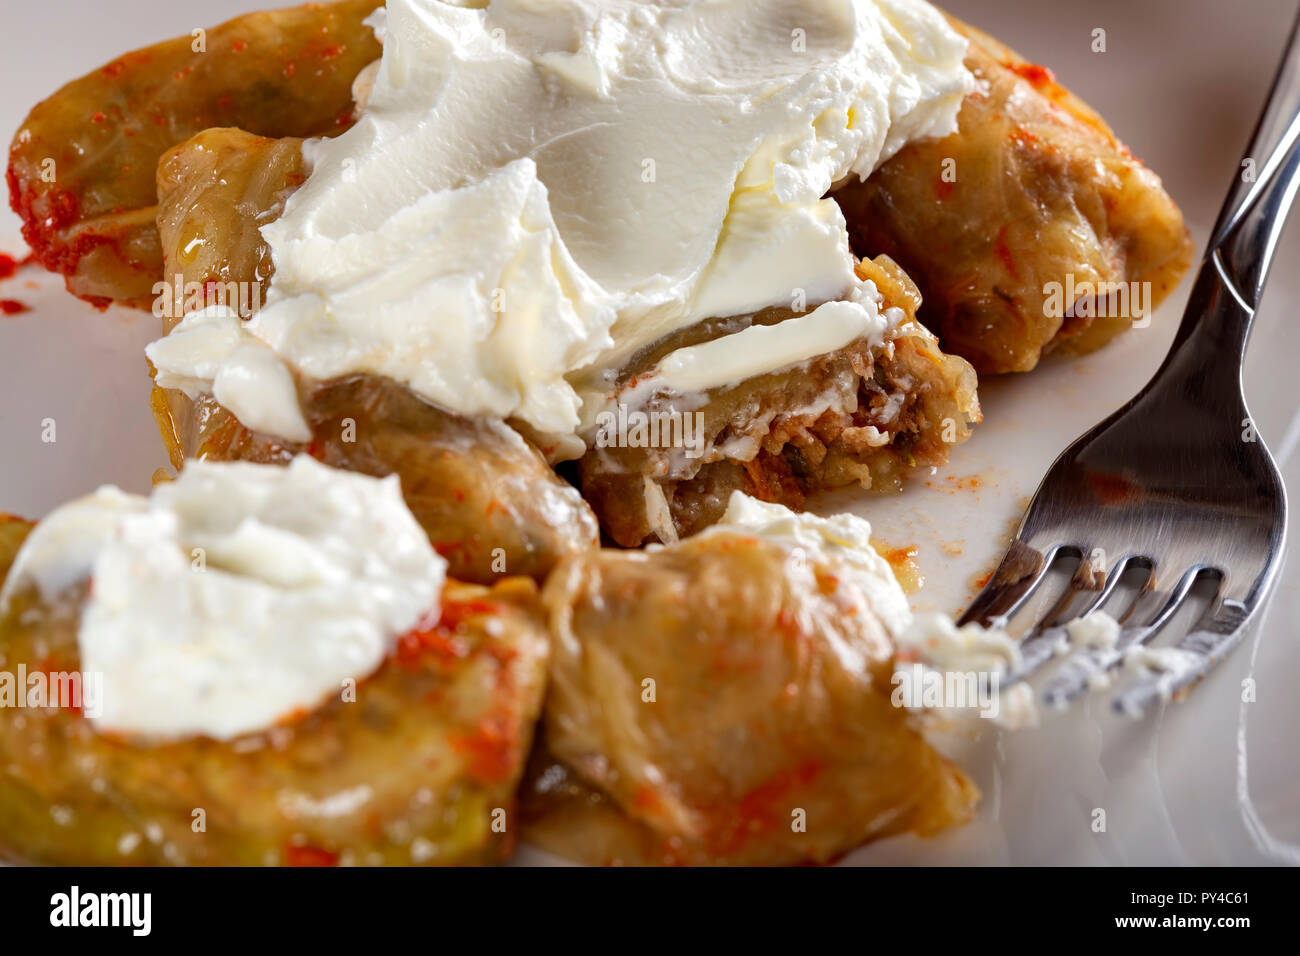 Sarmale - traditional Romanian food - close up view Stock Photo